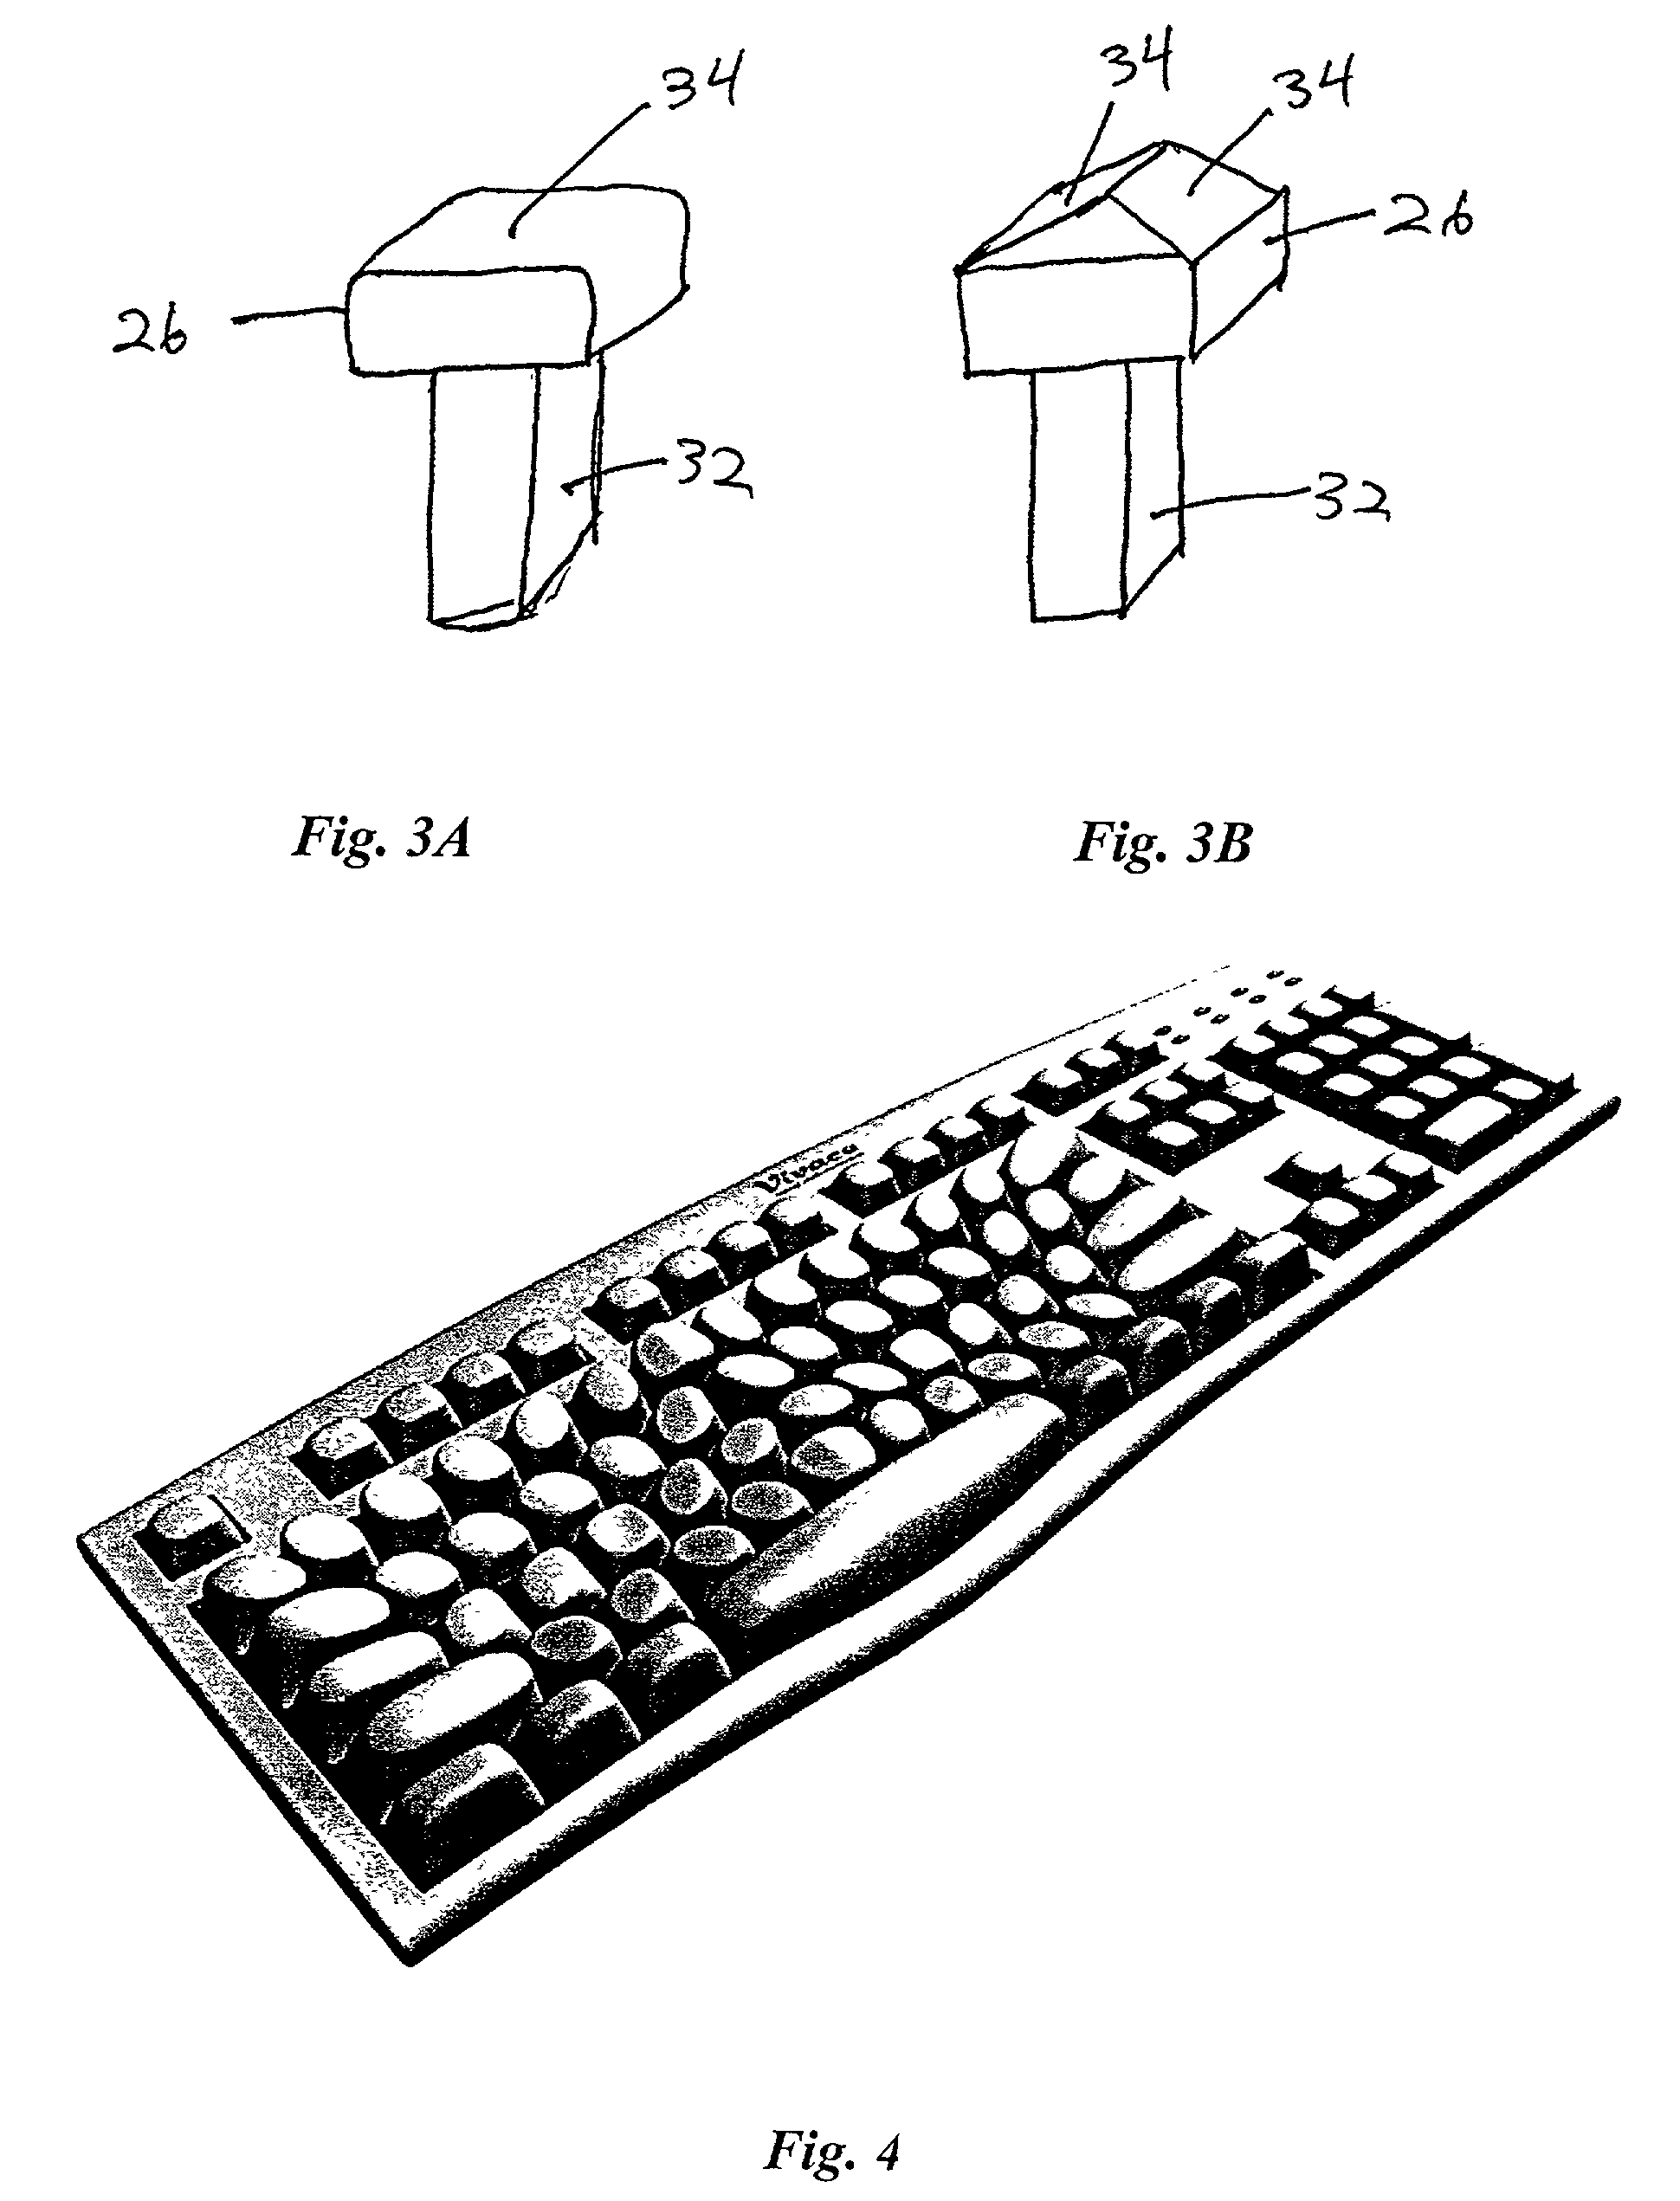 Keyboard contoured to the natural shape of the hand